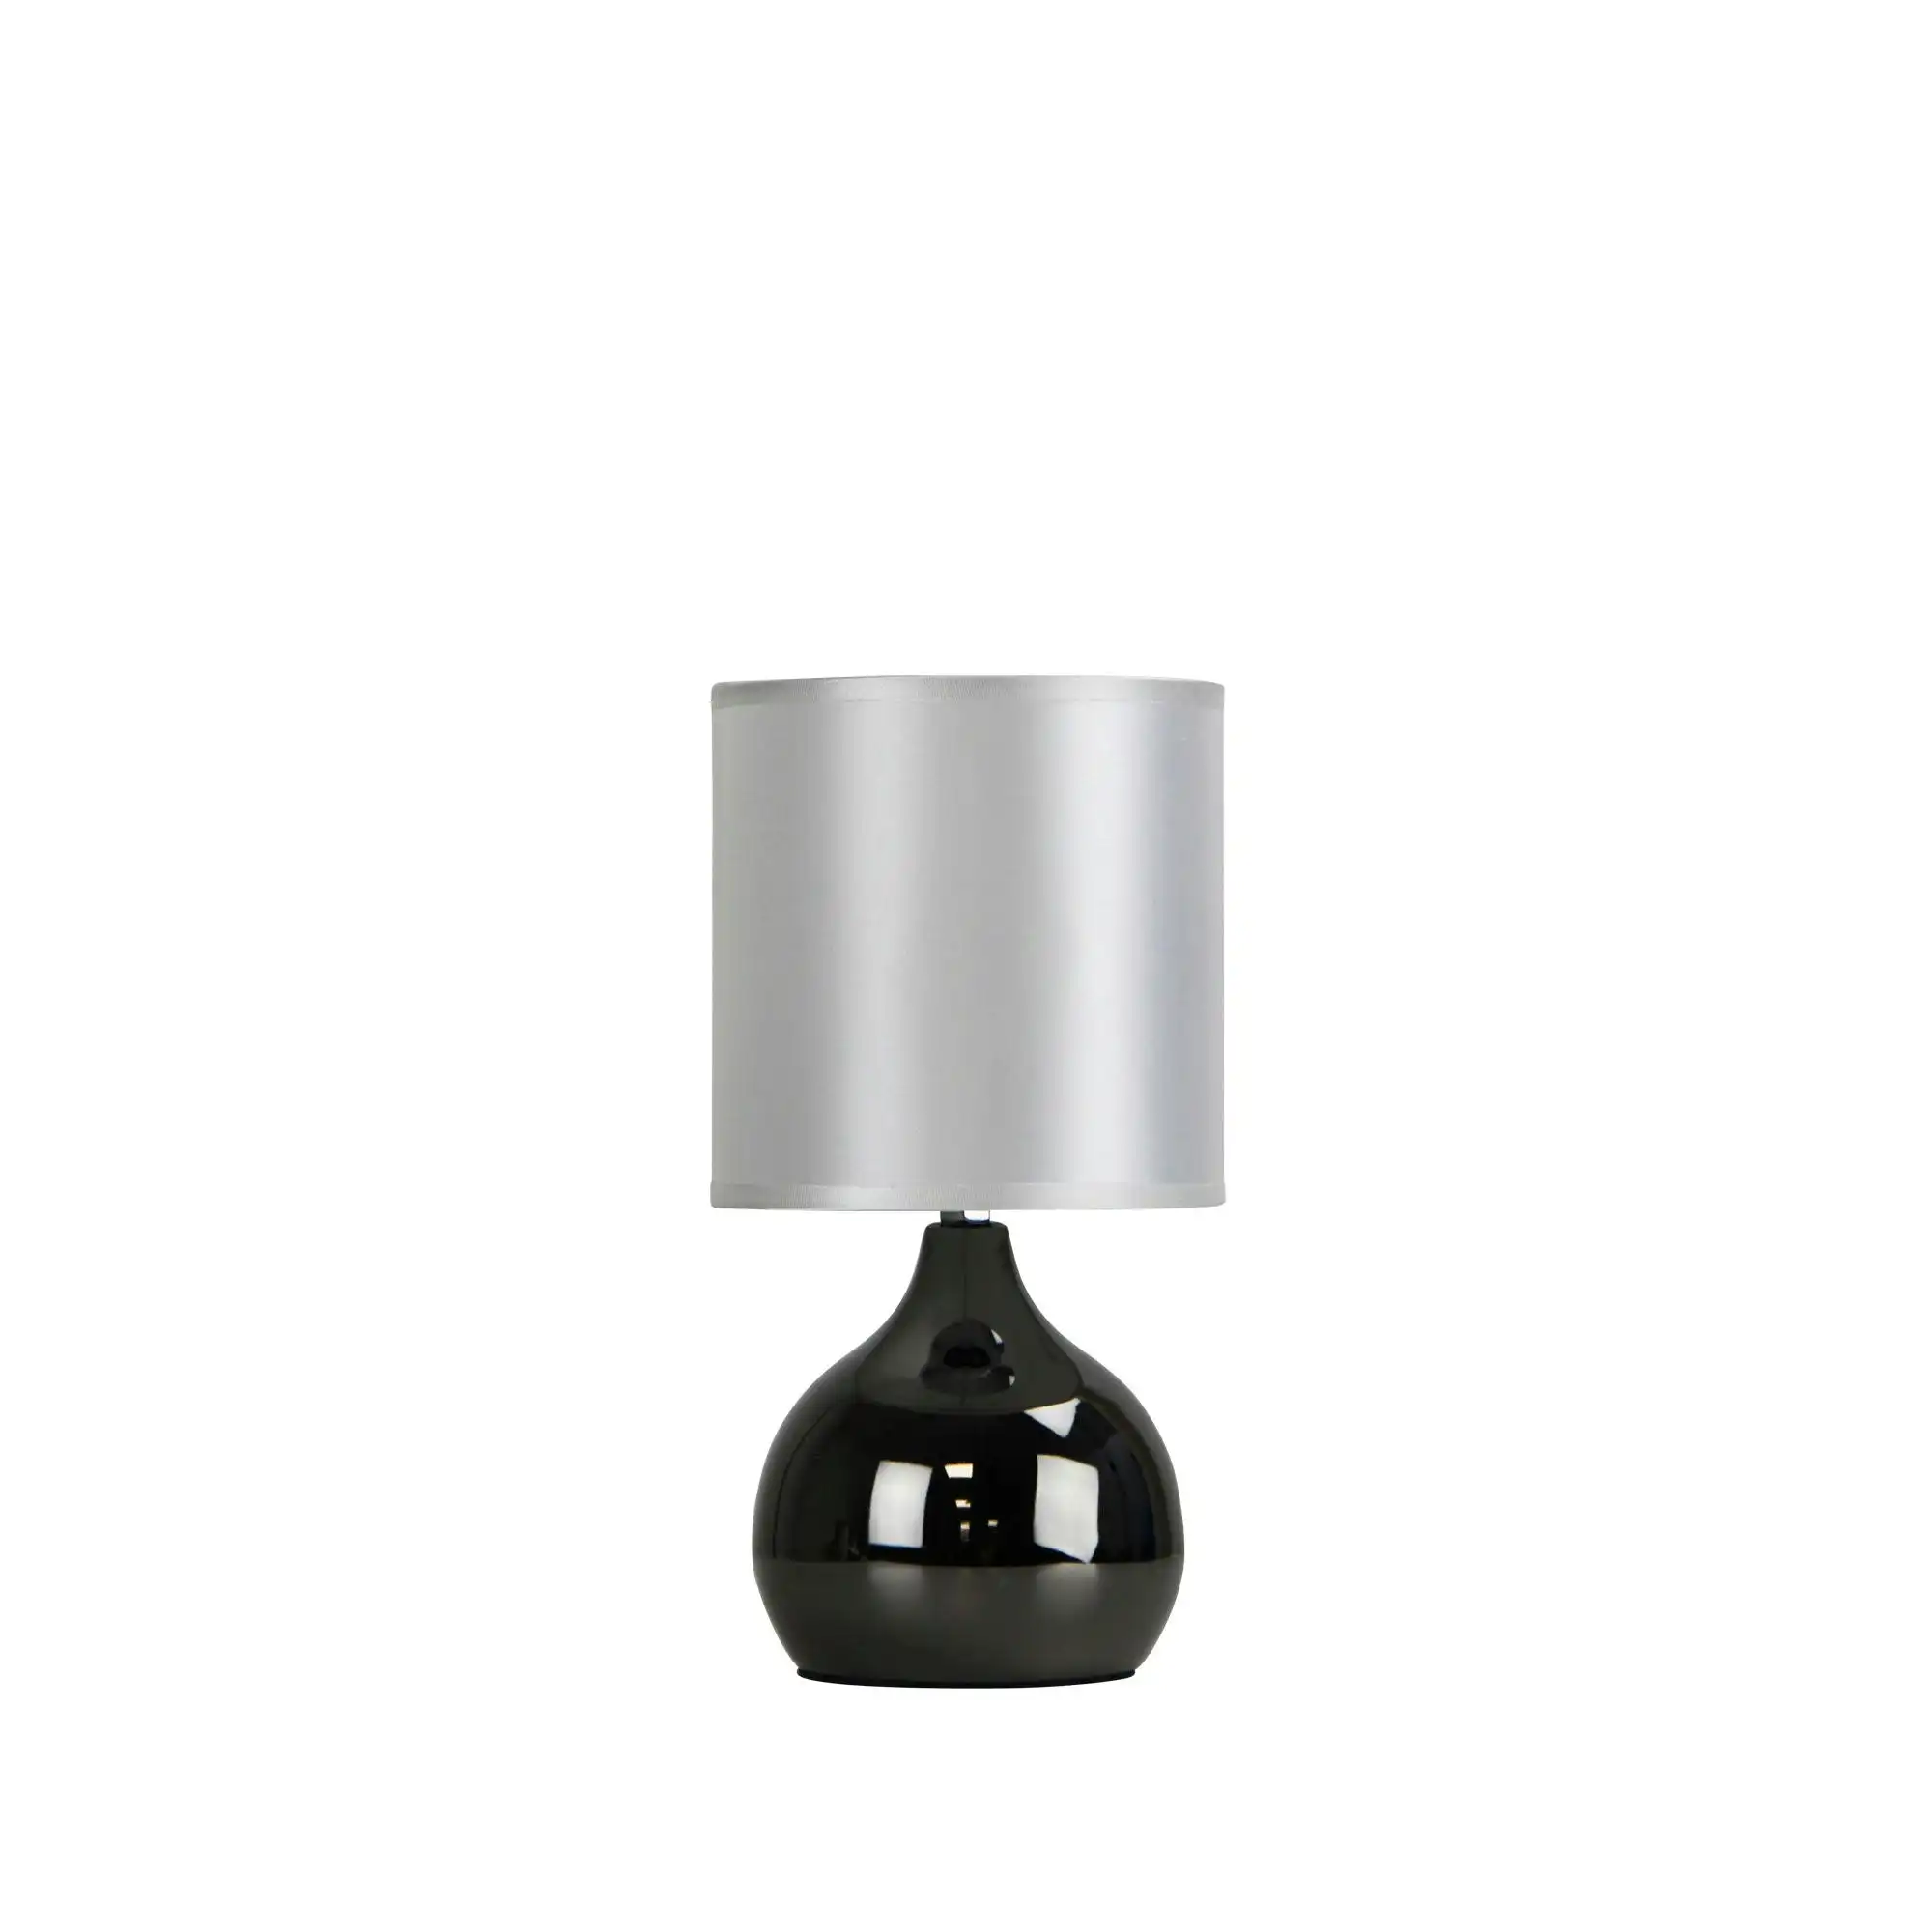 LOTTI ON / OFF Touch Lamp in Gunmetal Finish